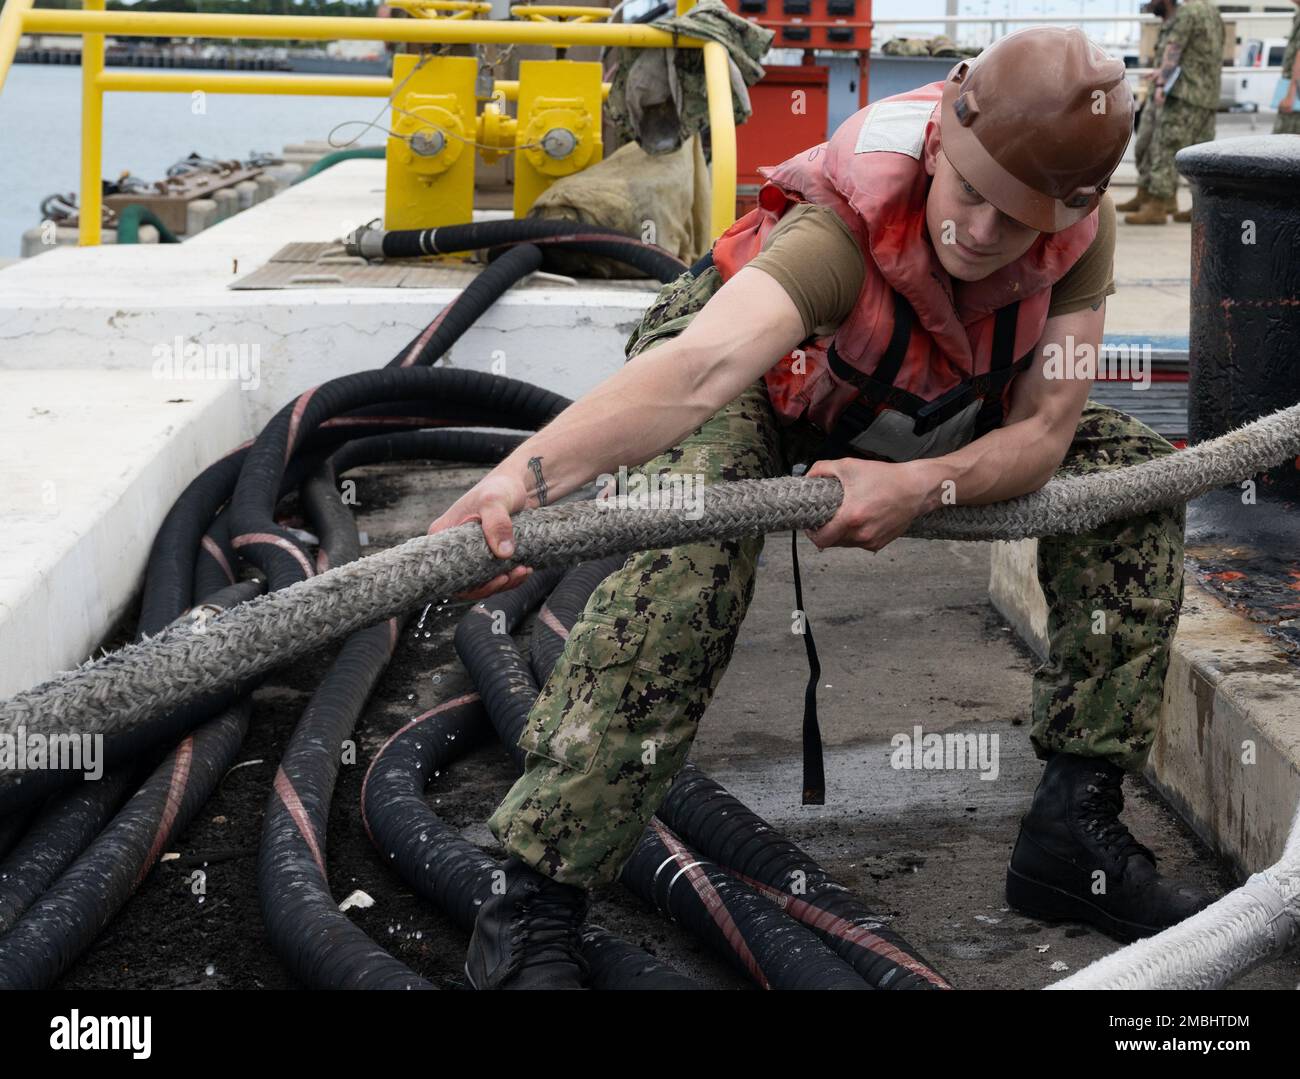 220616-N-LN285-3091 JOINT BASE PEARL HARBOR-HICKAM (June 16, 2022) --Fire Control Technician Seaman Joseph Pryor, from Grass Valley, Ca., assigned to the Los Angeles-class fast-attack submarine USS Charlotte (SNN 766) heave a mooring line attached to the Los Angeles-class fast-attack submarine USS Topeka (SSN 754), June 16, 2022. Topeka is capable of supporting various missions, including anti-submarine warfare, anti-surface ship warfare, strike warfare, and intelligence, surveillance, and reconnaissance, June 16, 2022. Stock Photo